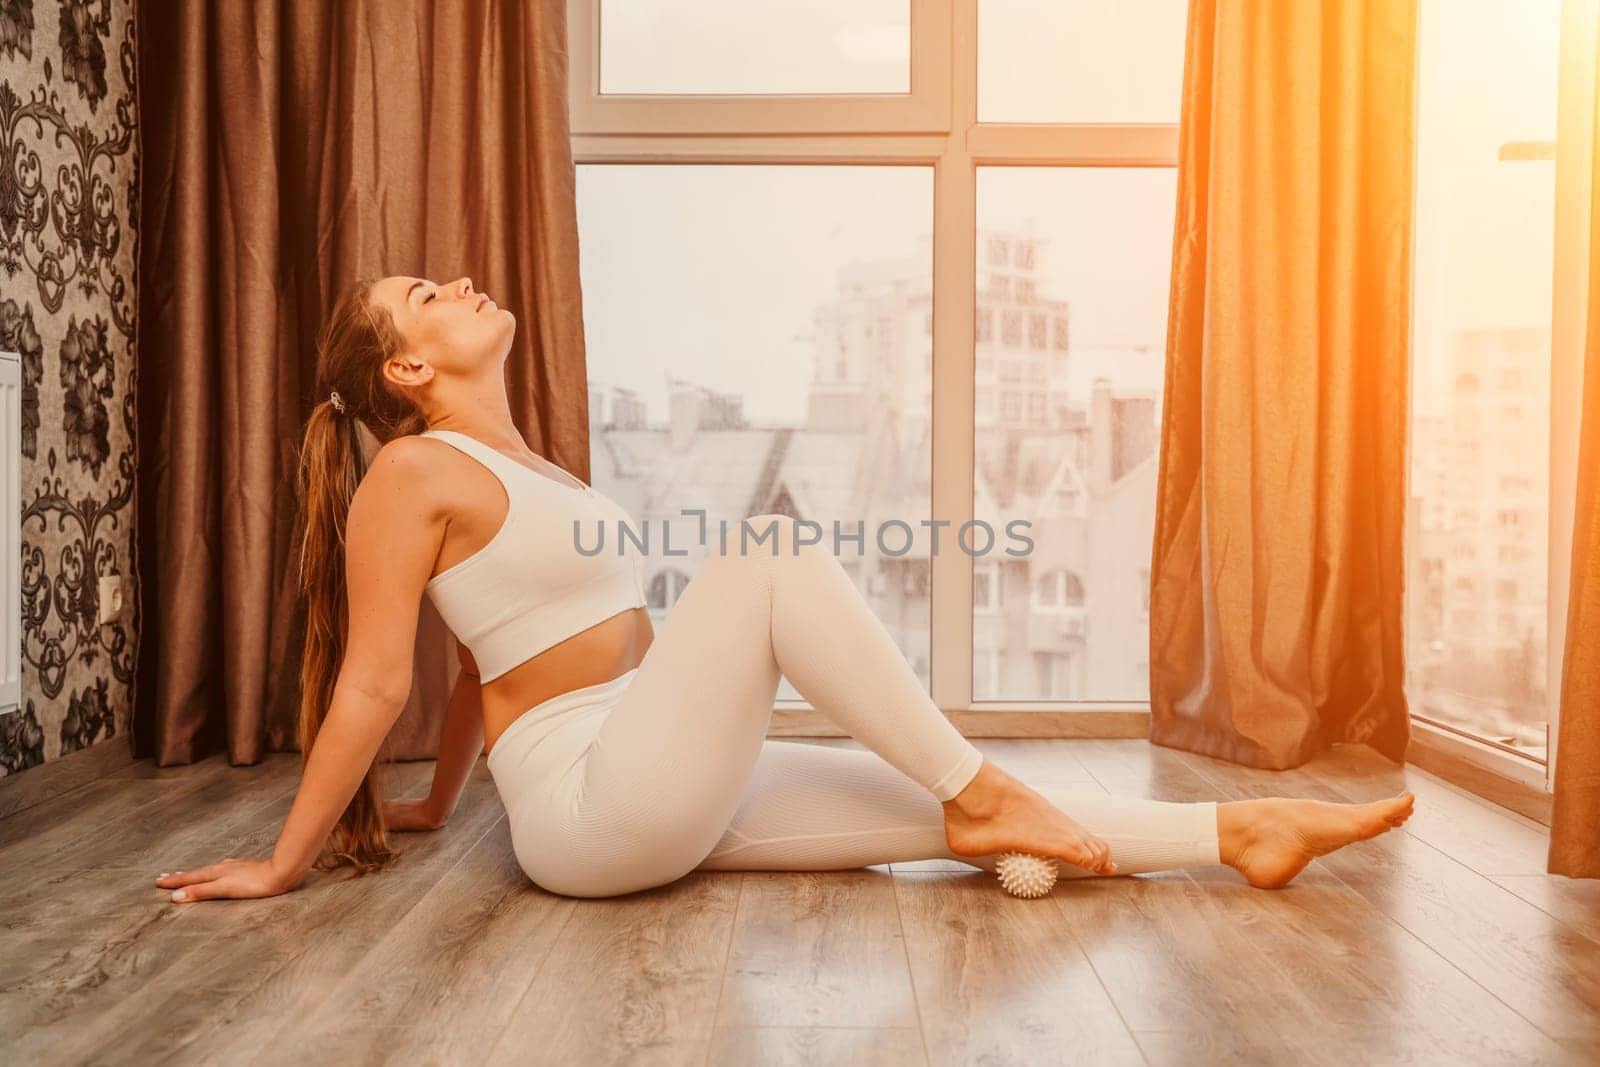 Middle aged athletic attractive woman practicing yoga. Works out at home or in a yoga studio, sportswear, white pants and a full-length top indoors. Healthy lifestyle concept.